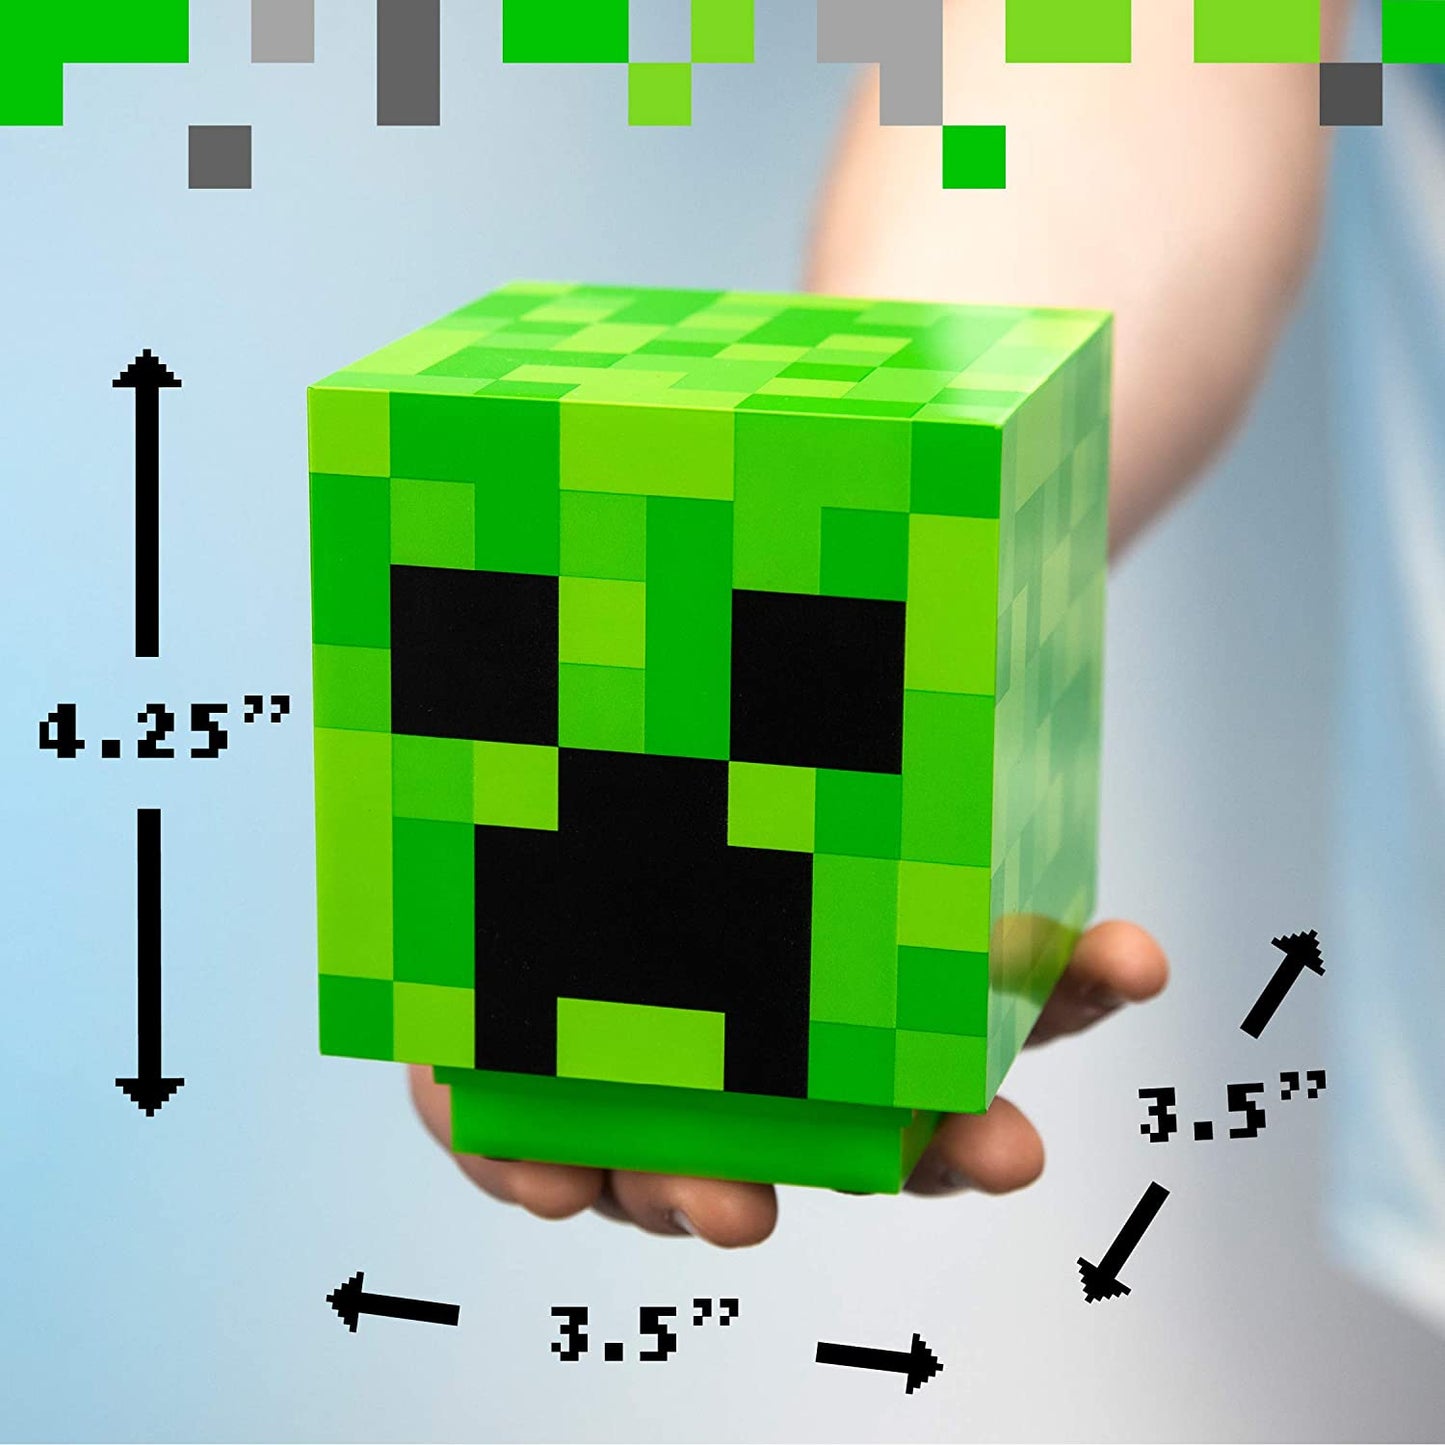 Size measurements for a Minecraft creeper light. 4.24 inches in height, 3.5 inches in length and 3.5 inches in depth.